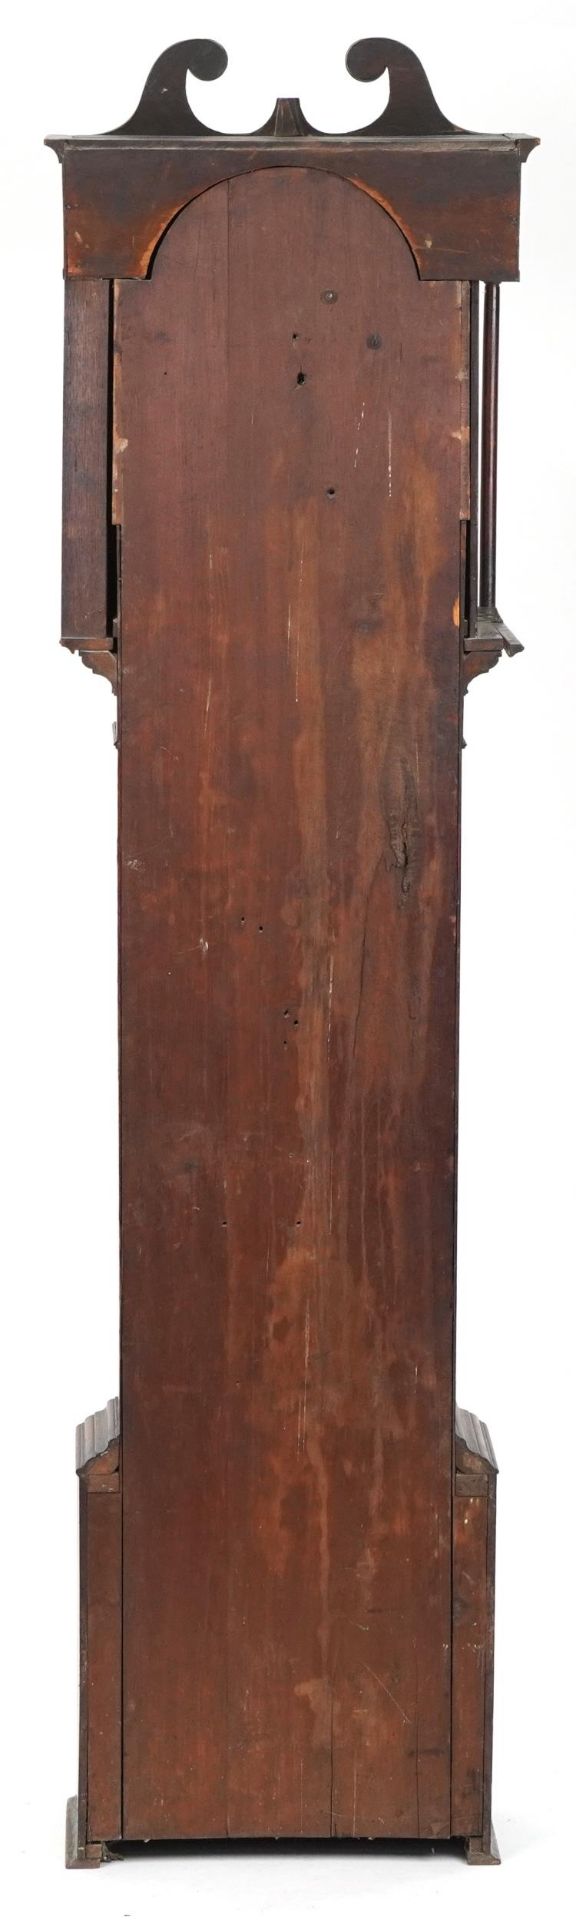 19th century oak cases longcase clock with painted dial having Roman and Arabic numerals, - Image 4 of 7